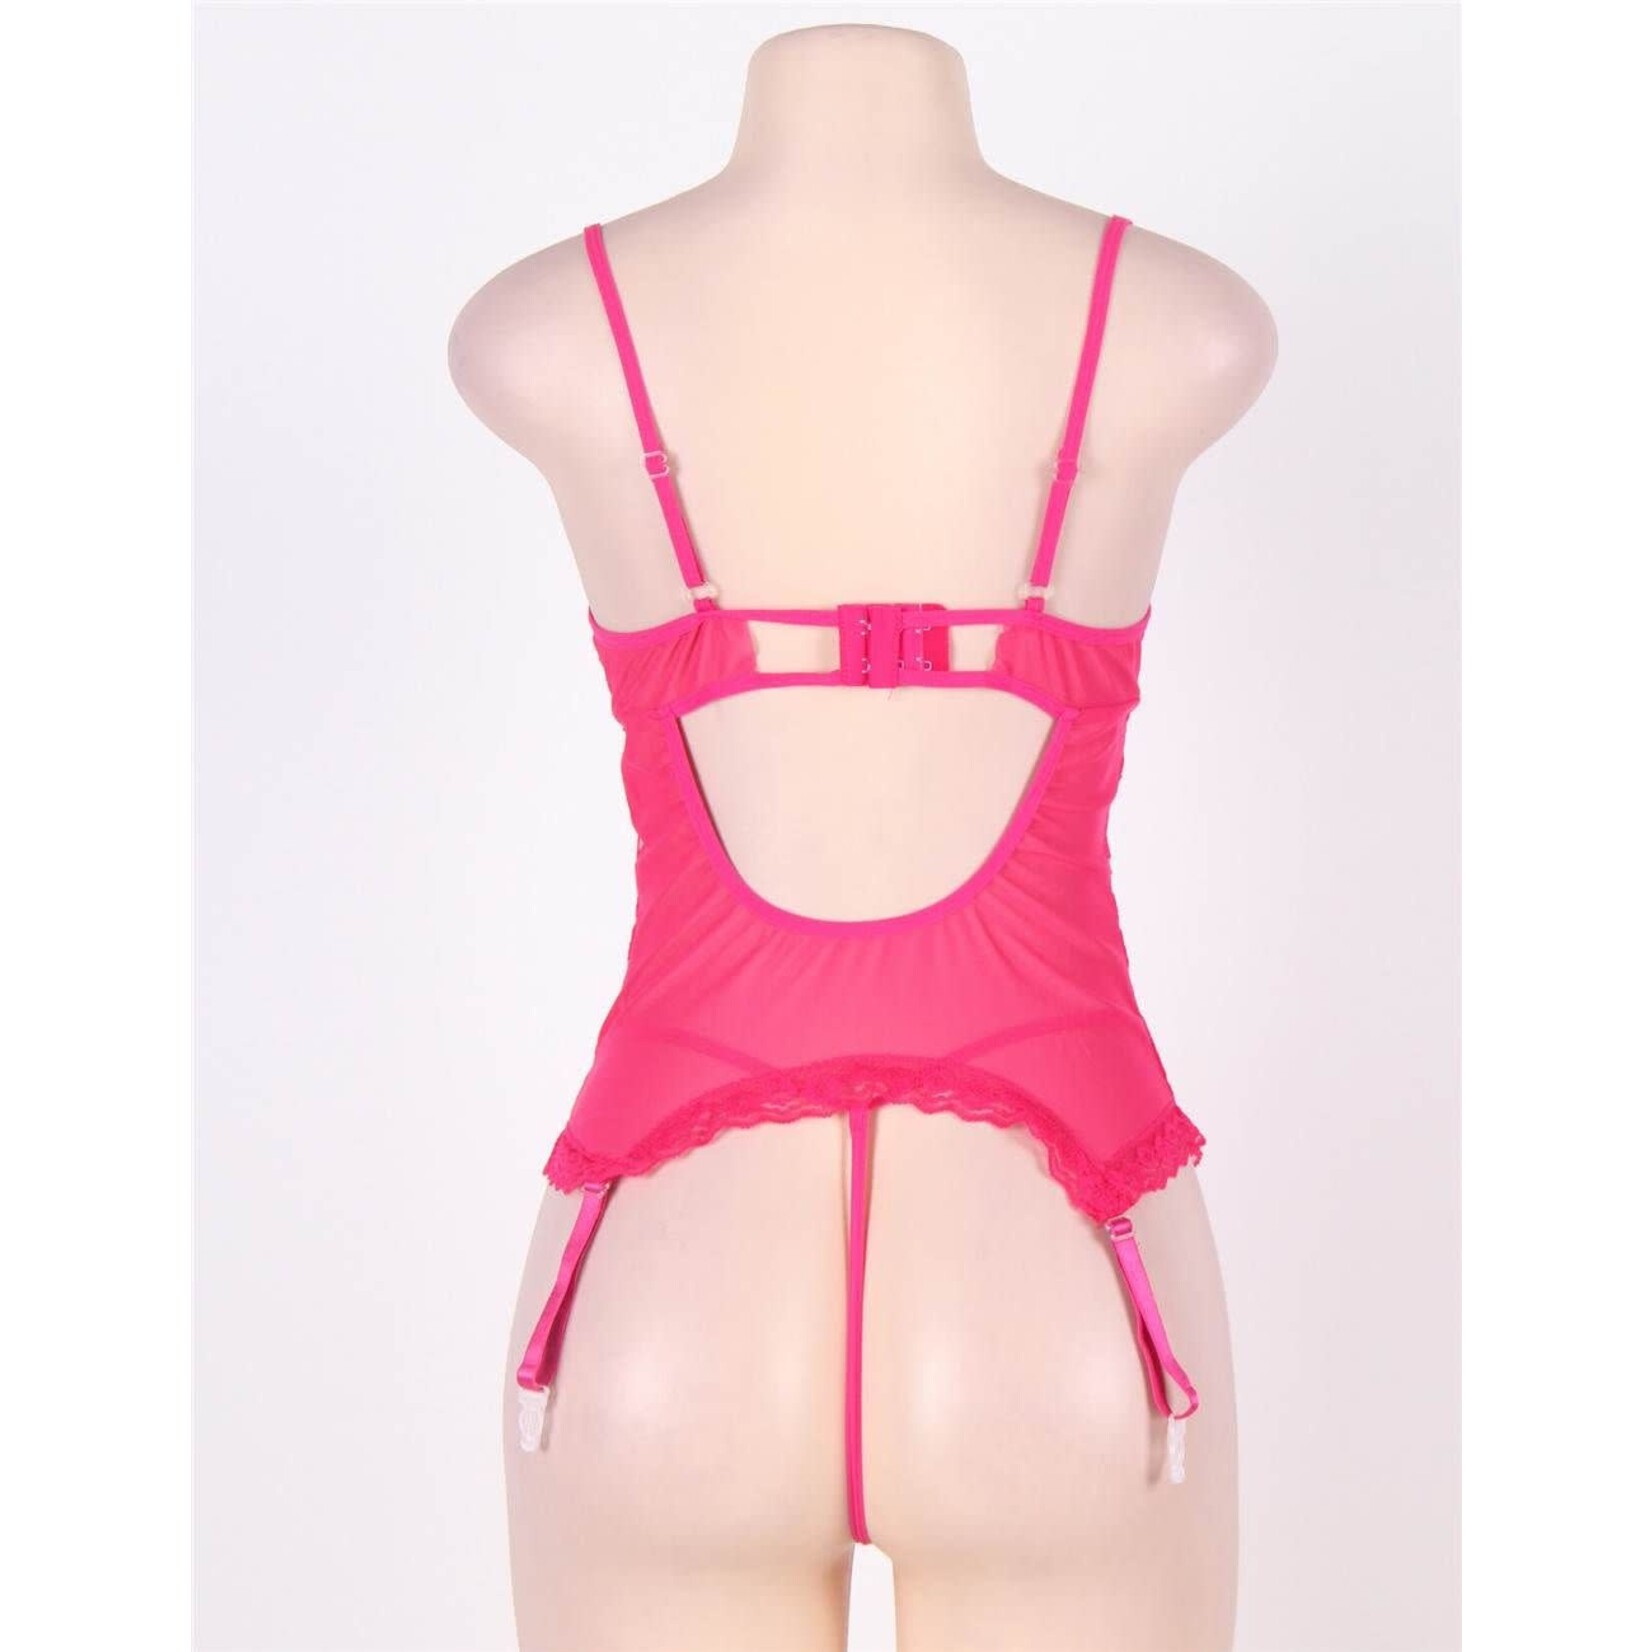 OH YEAH! -  ROSY OPEN BACK LACE TEDDY L